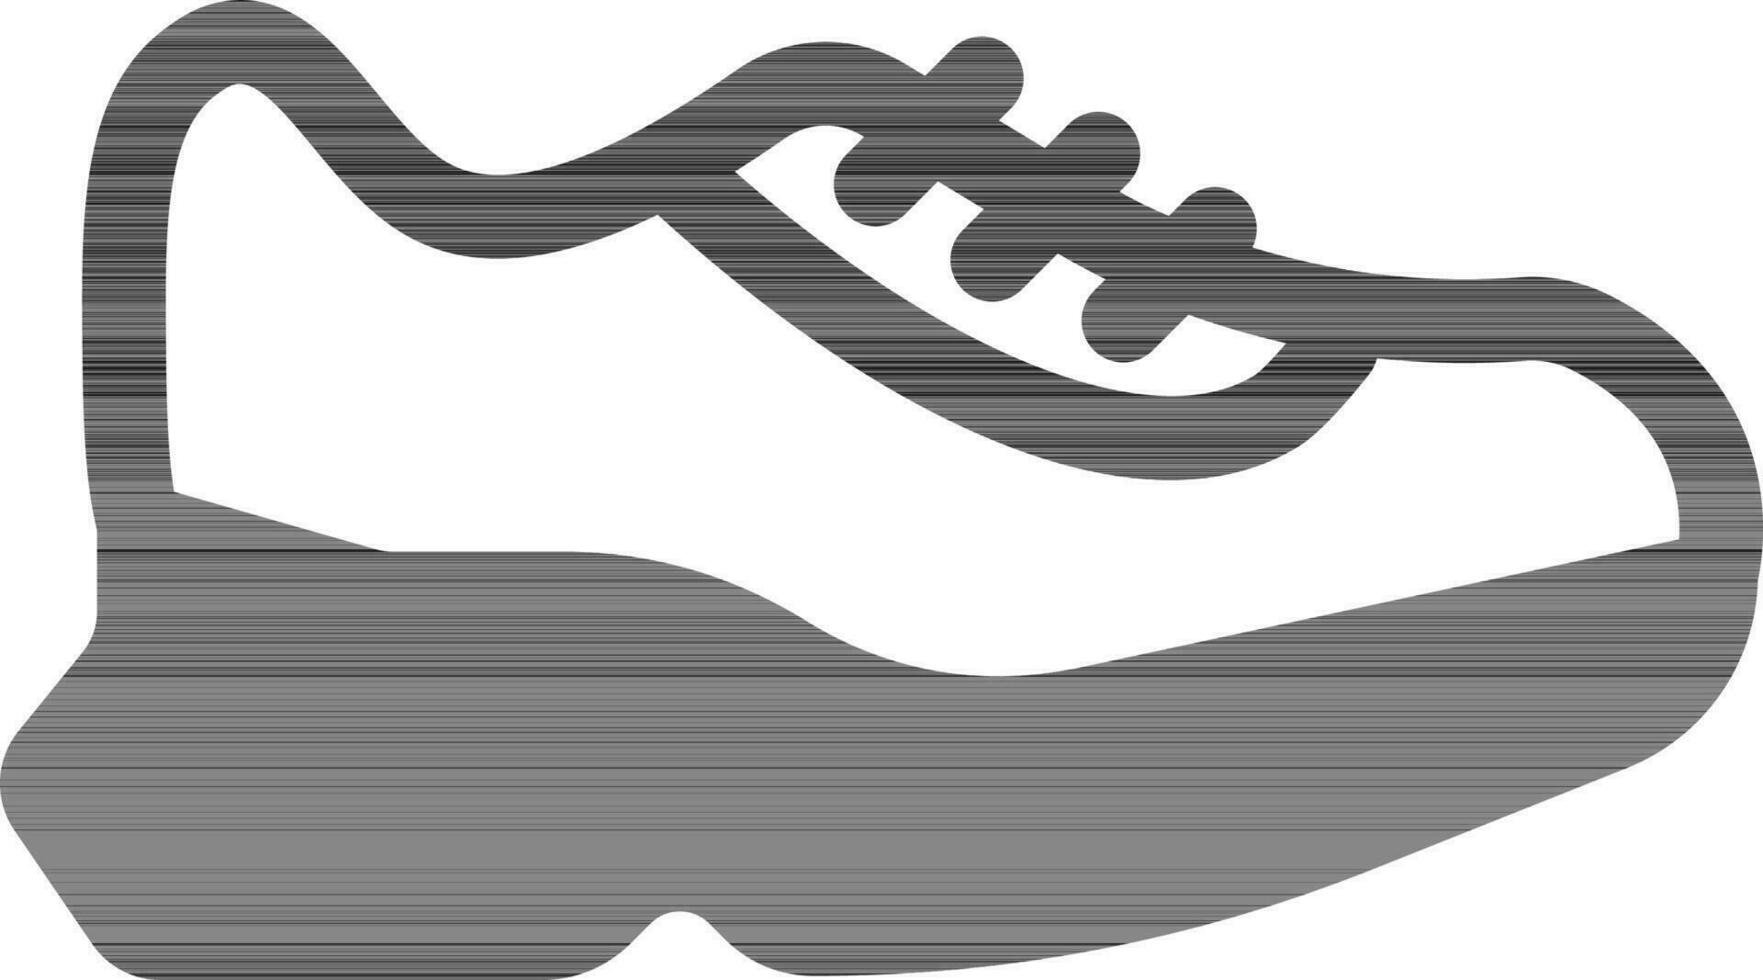 Sportswear Shoes Icon in Black and White Color. vector